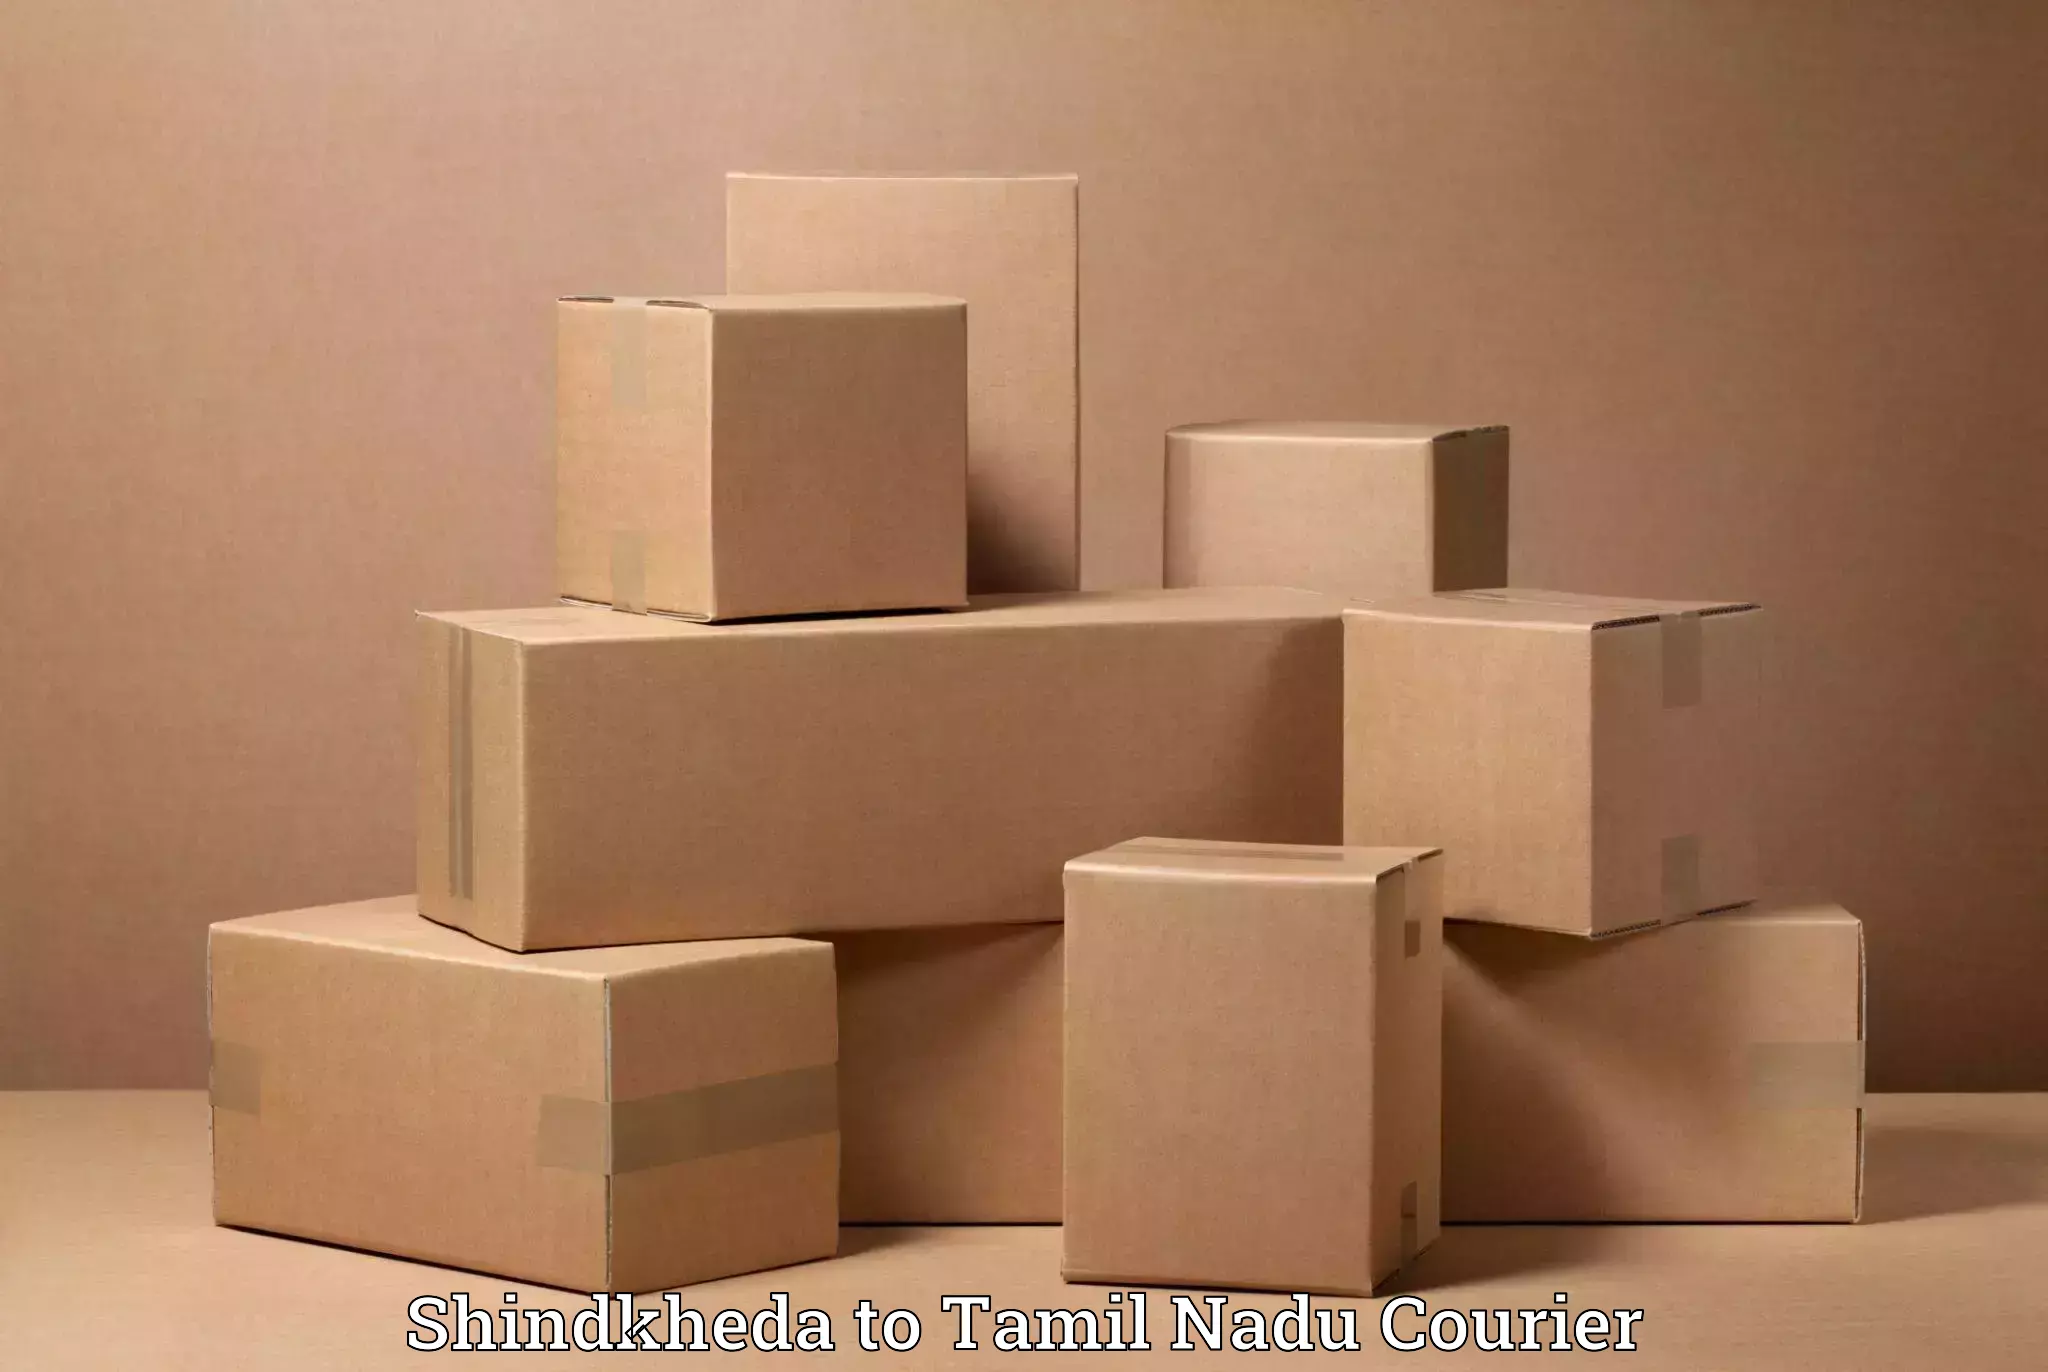 Quality household movers Shindkheda to Thanjavur